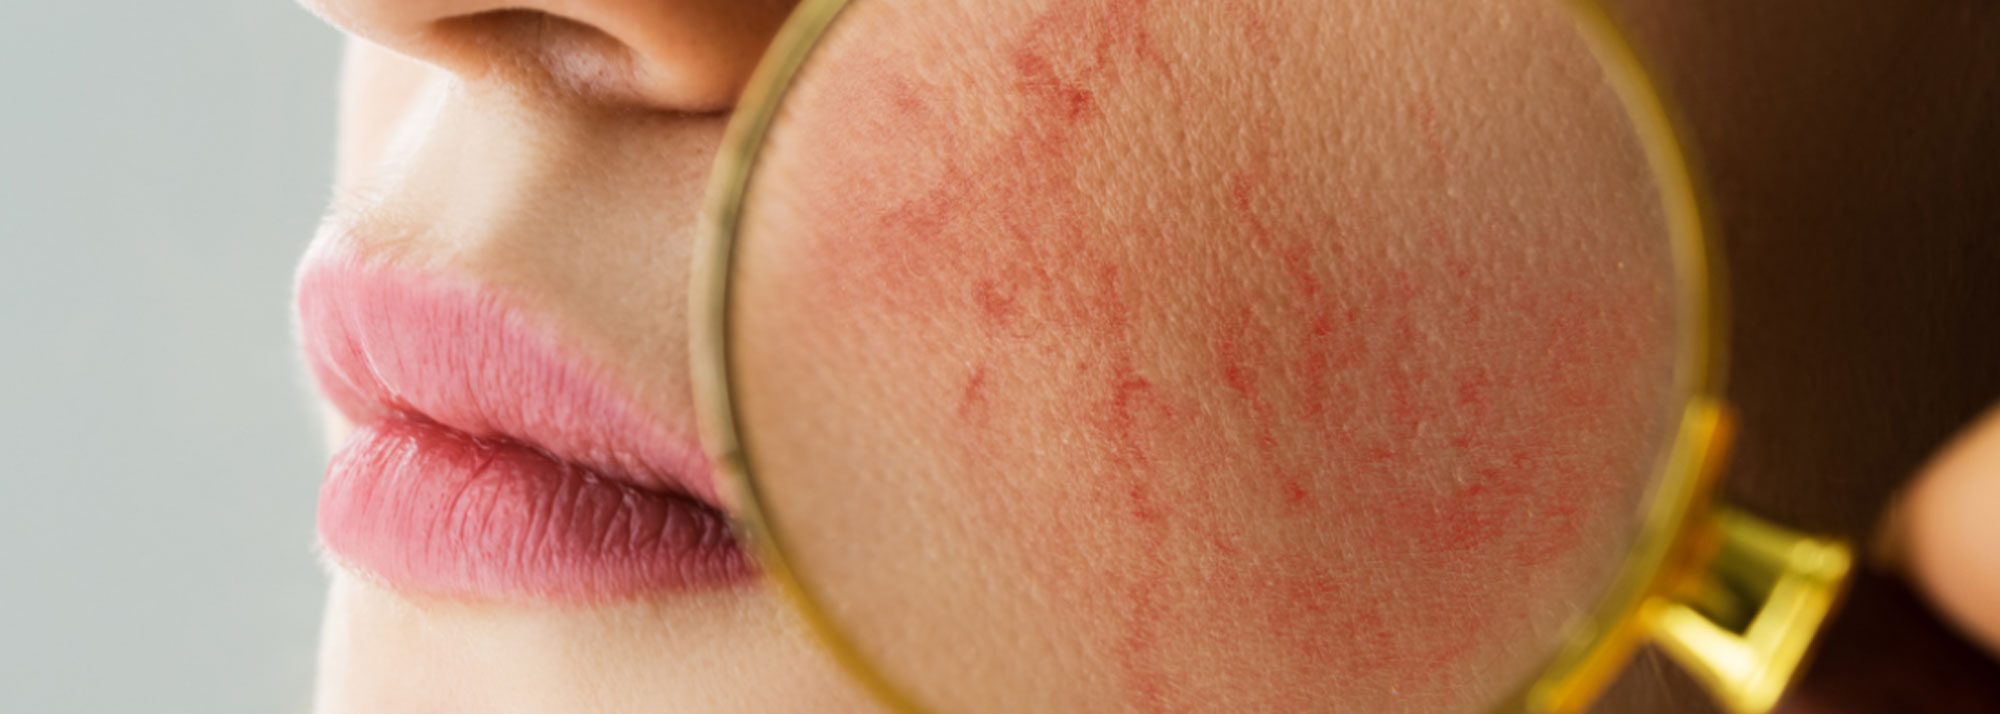 What is Rosacea? Caring for Rosacea-Prone Skin